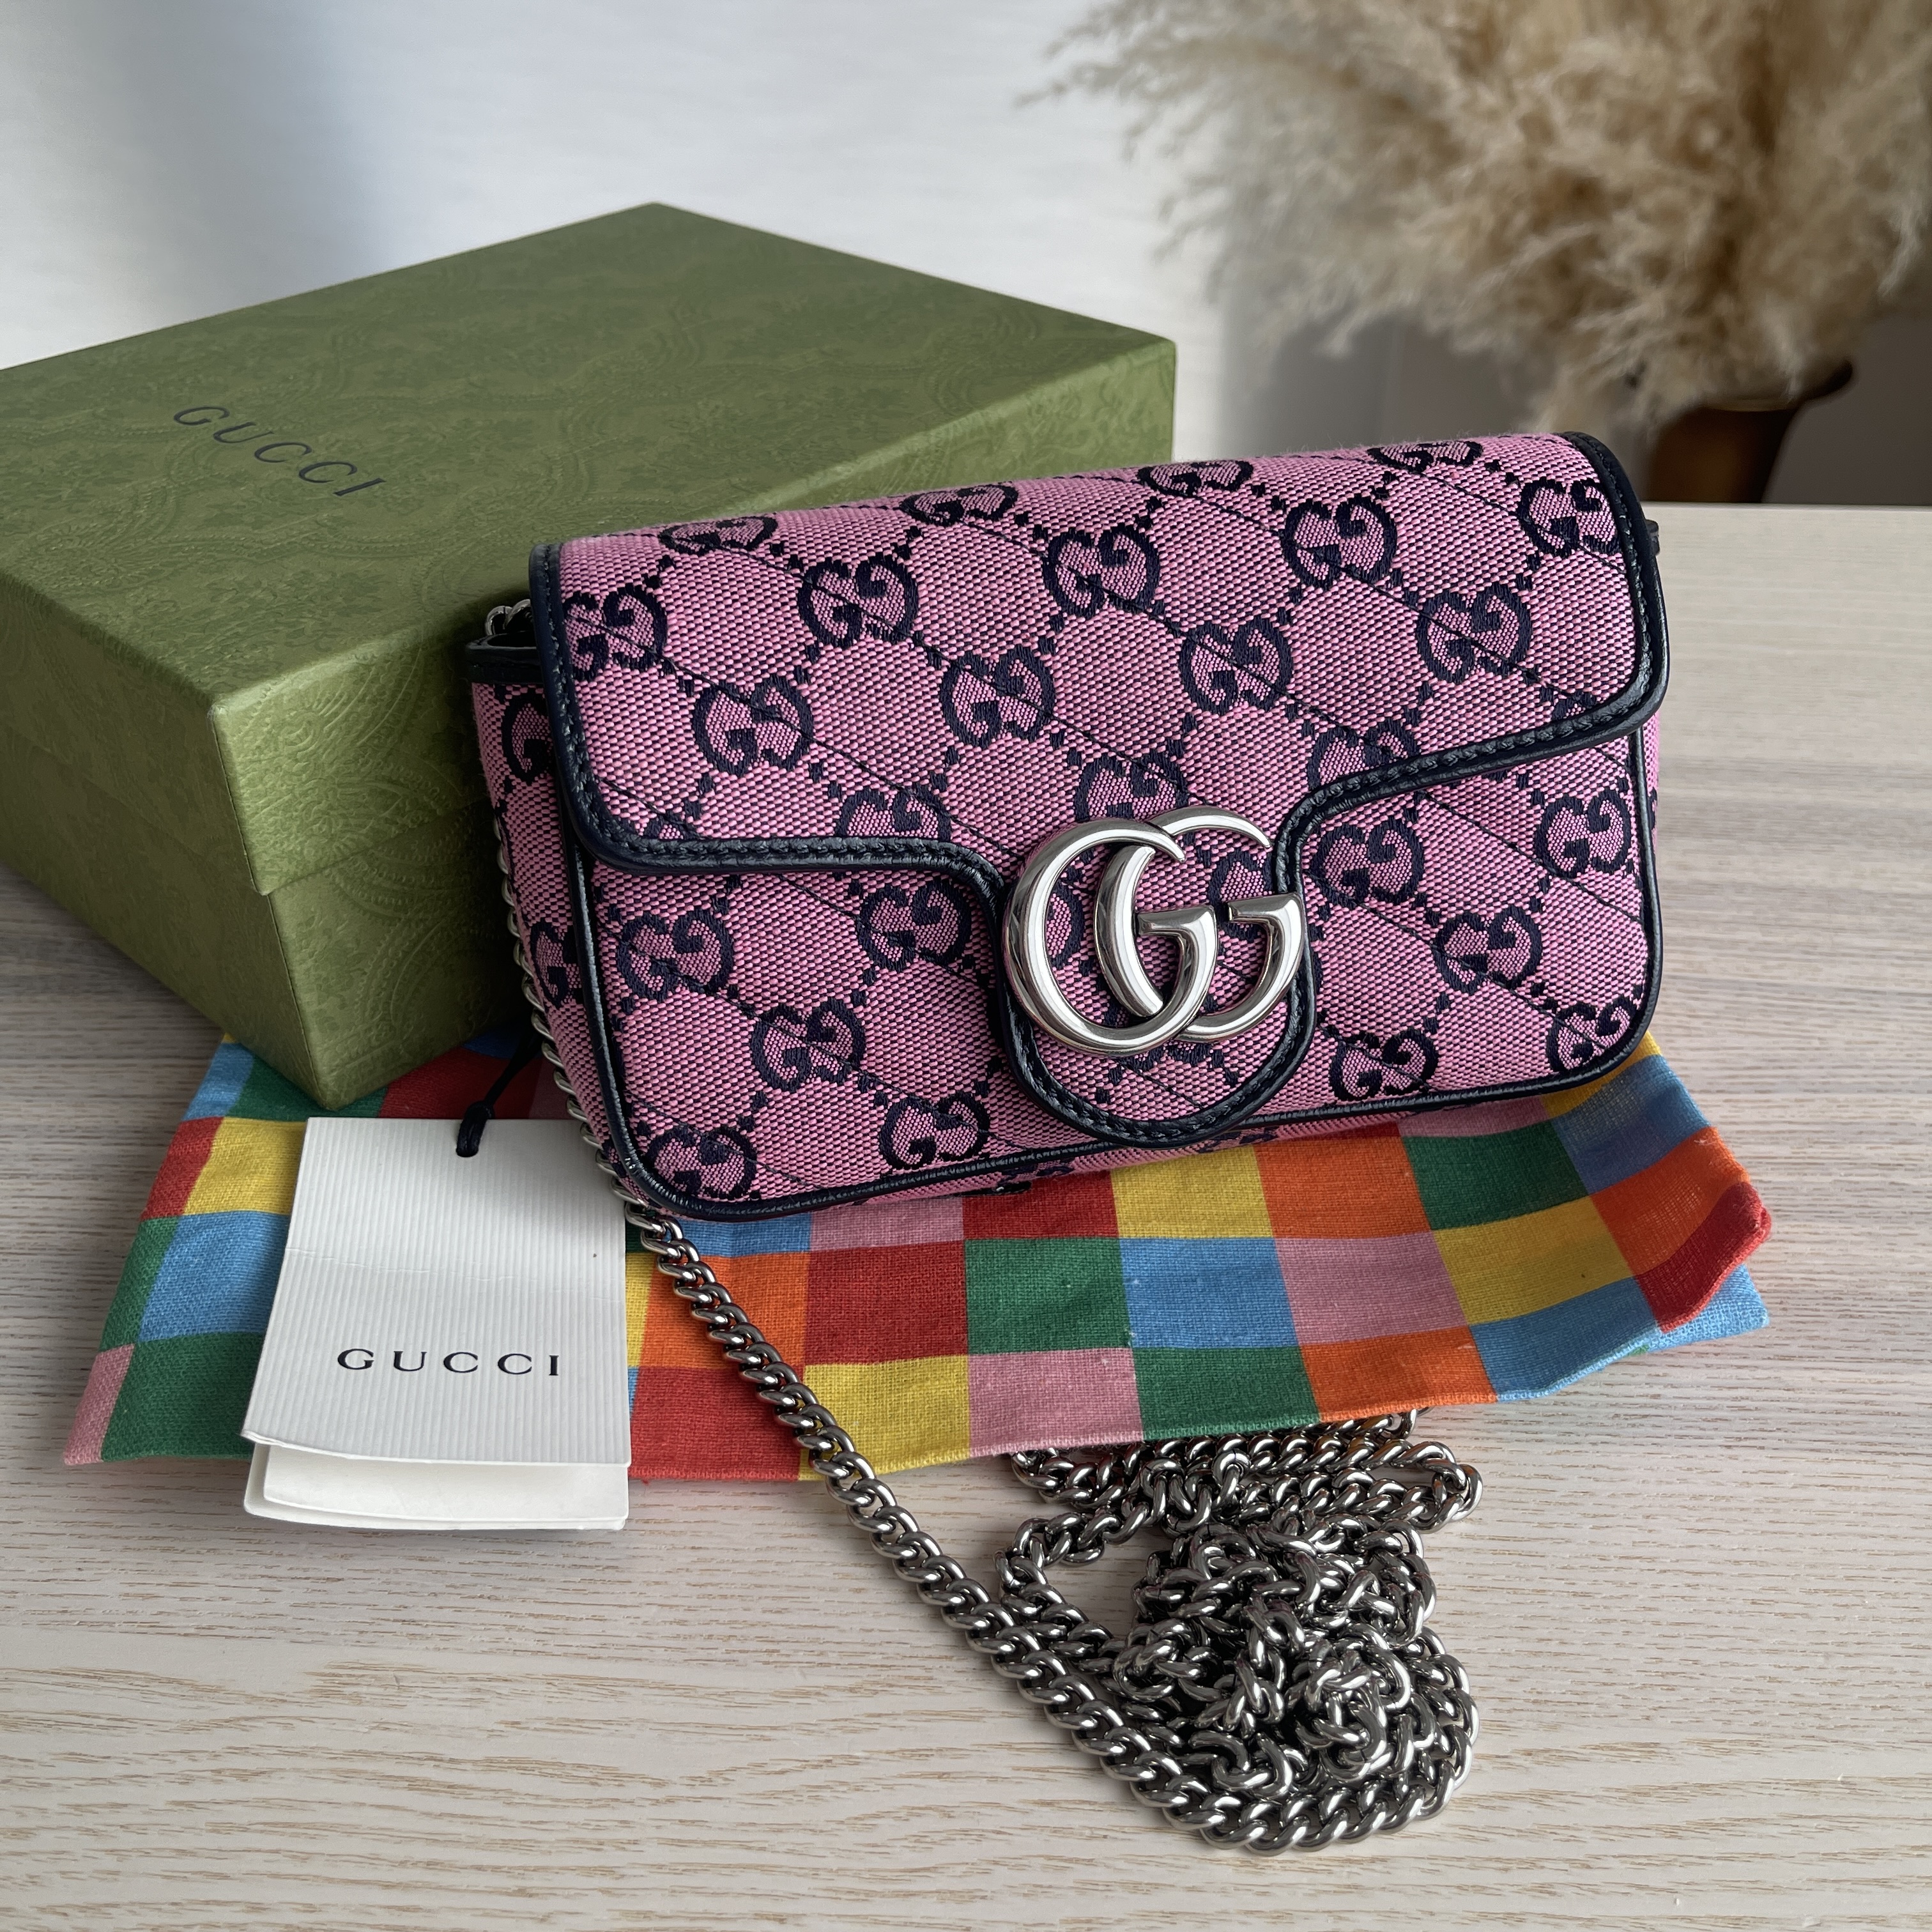 Gucci goes for the multicolor monogram in its latest collection